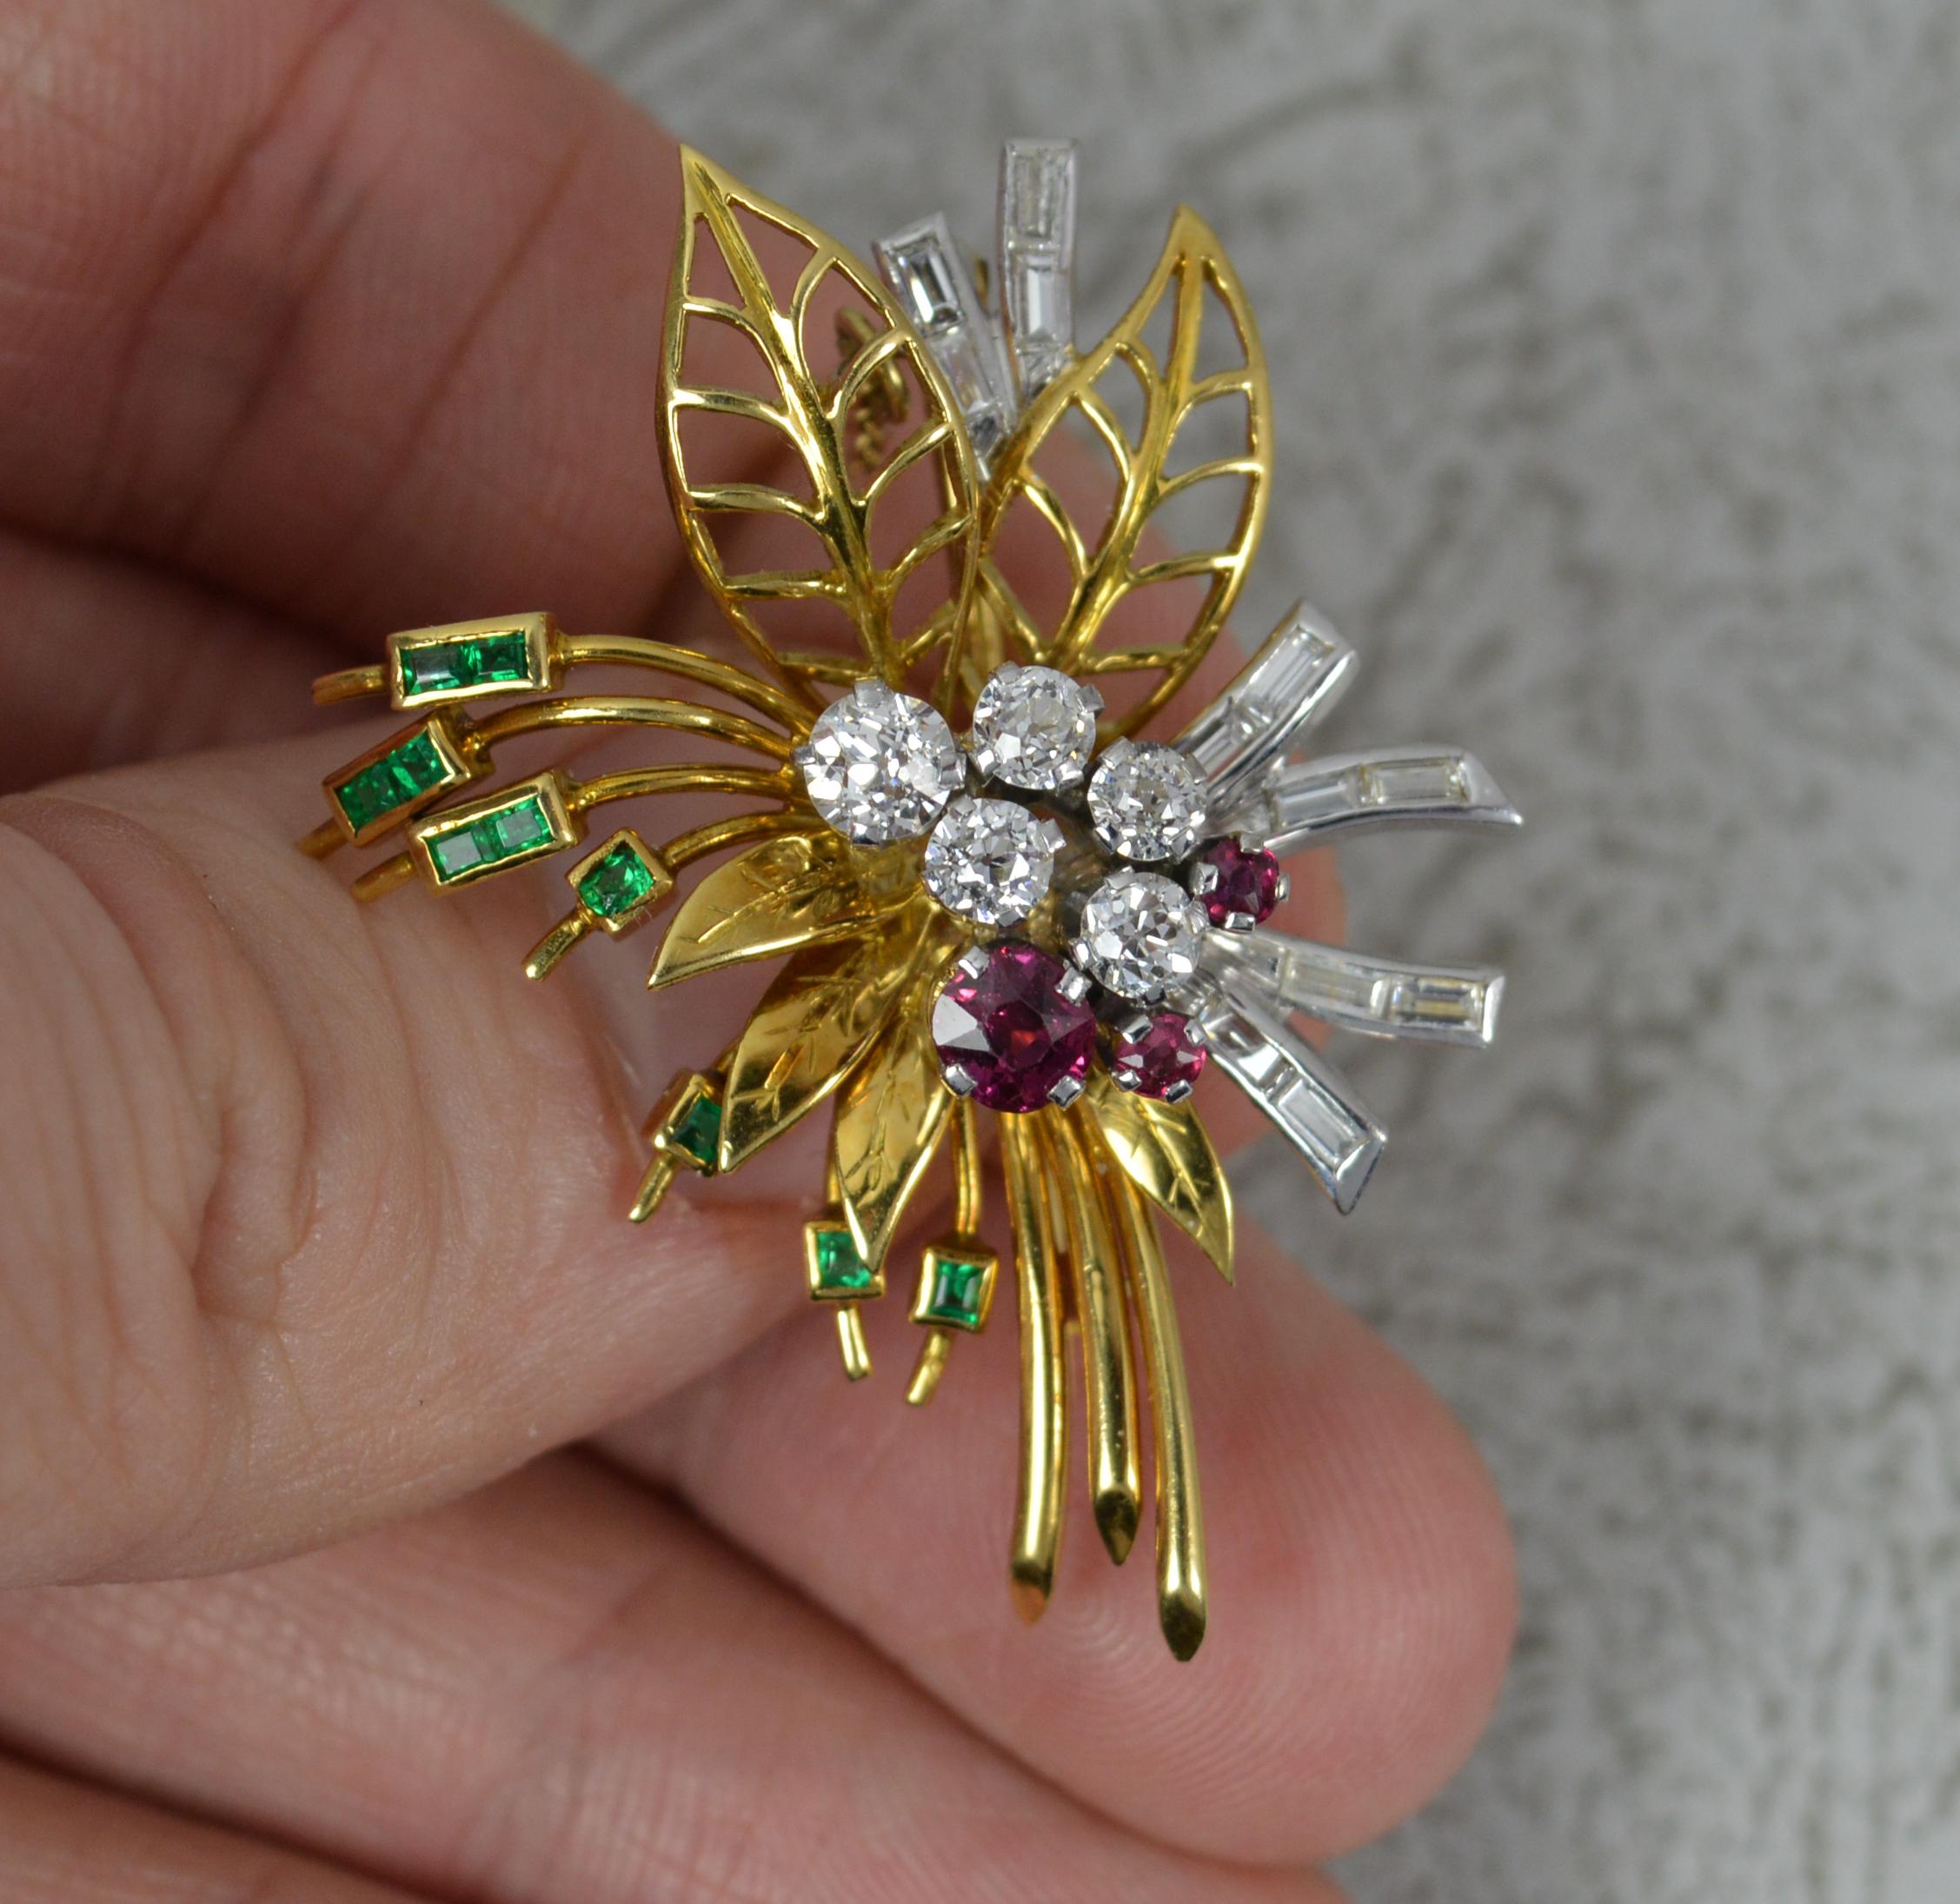 A stunning Art Deco period bar brooch. Circa 1950/60.
Solid 18 carat yellow gold example with platinum setting.
Designed as a vivid colourful floral spray brooch. To the centre are natural old cut diamonds and bright round cut rubies. Surrounding